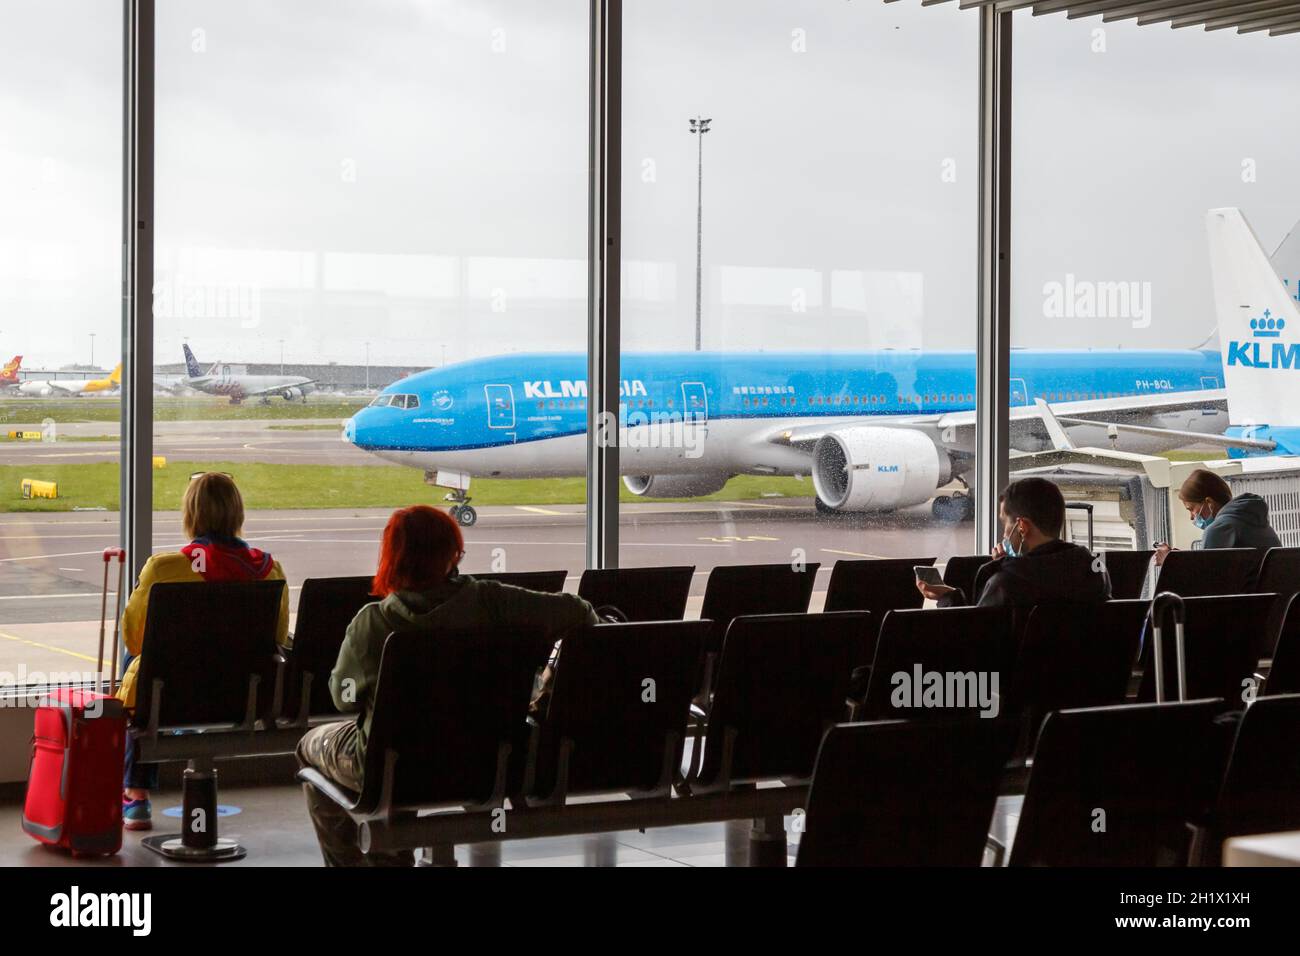 Amsterdam, Netherlands - May 21, 2021: Passengers with KLM Royal Dutch Airlines airplane at Amsterdam Schiphol airport (AMS) in the Netherlands. Stock Photo